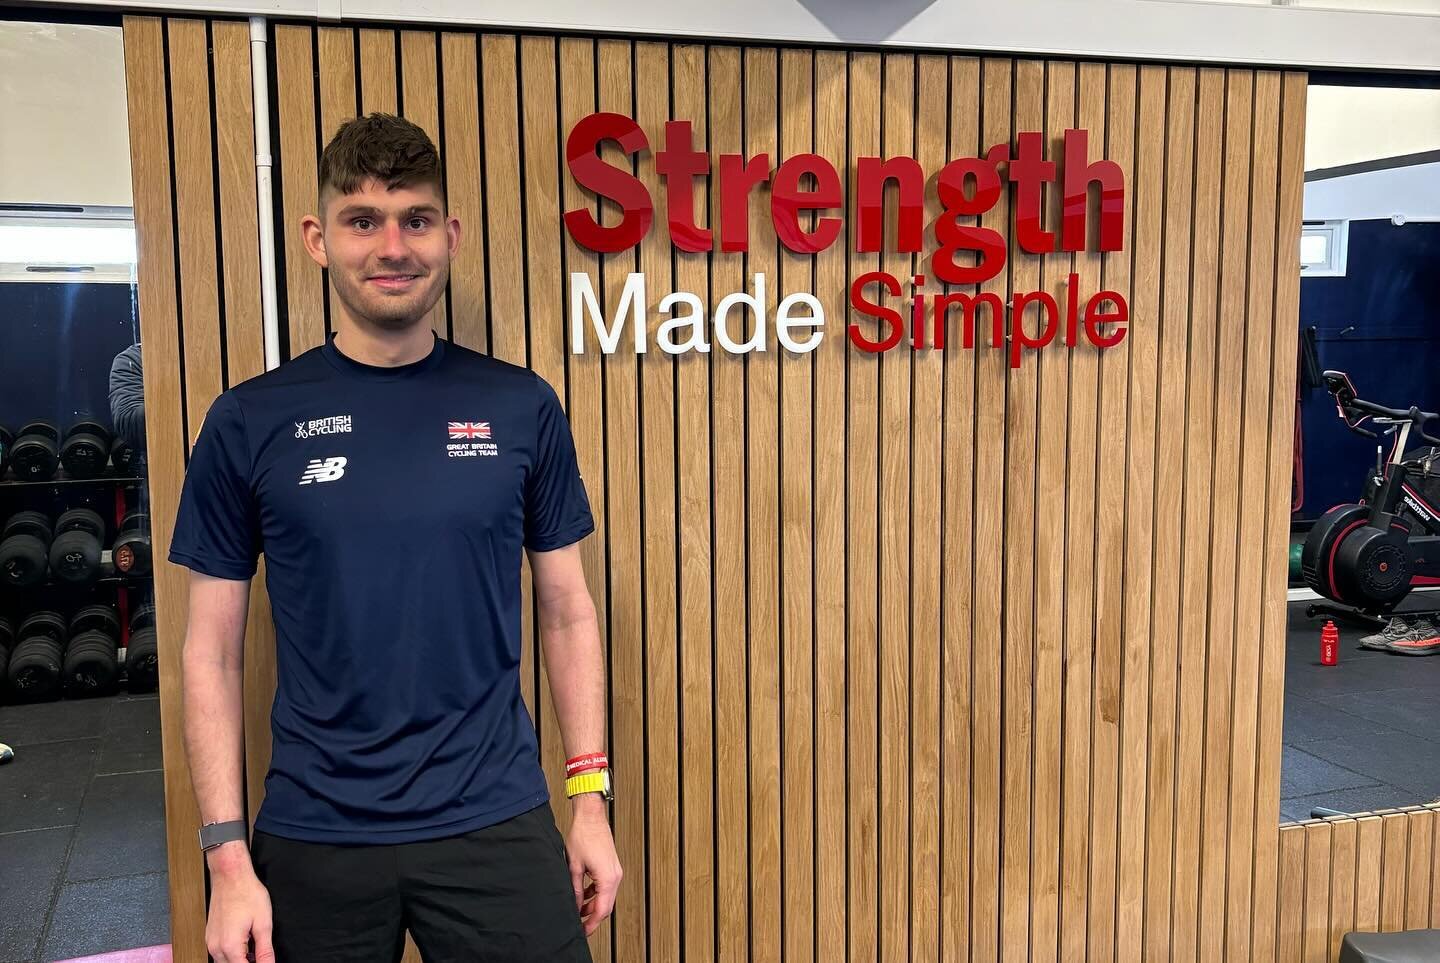 Client Shoutout! @_chriswilkins22 has been working ridiculously hard over the last year and has increased his lean mass, strength and is smashing PB&rsquo;s for TeamGB Paracycling! He&rsquo;s always keen to work hard and full of energy for his traini